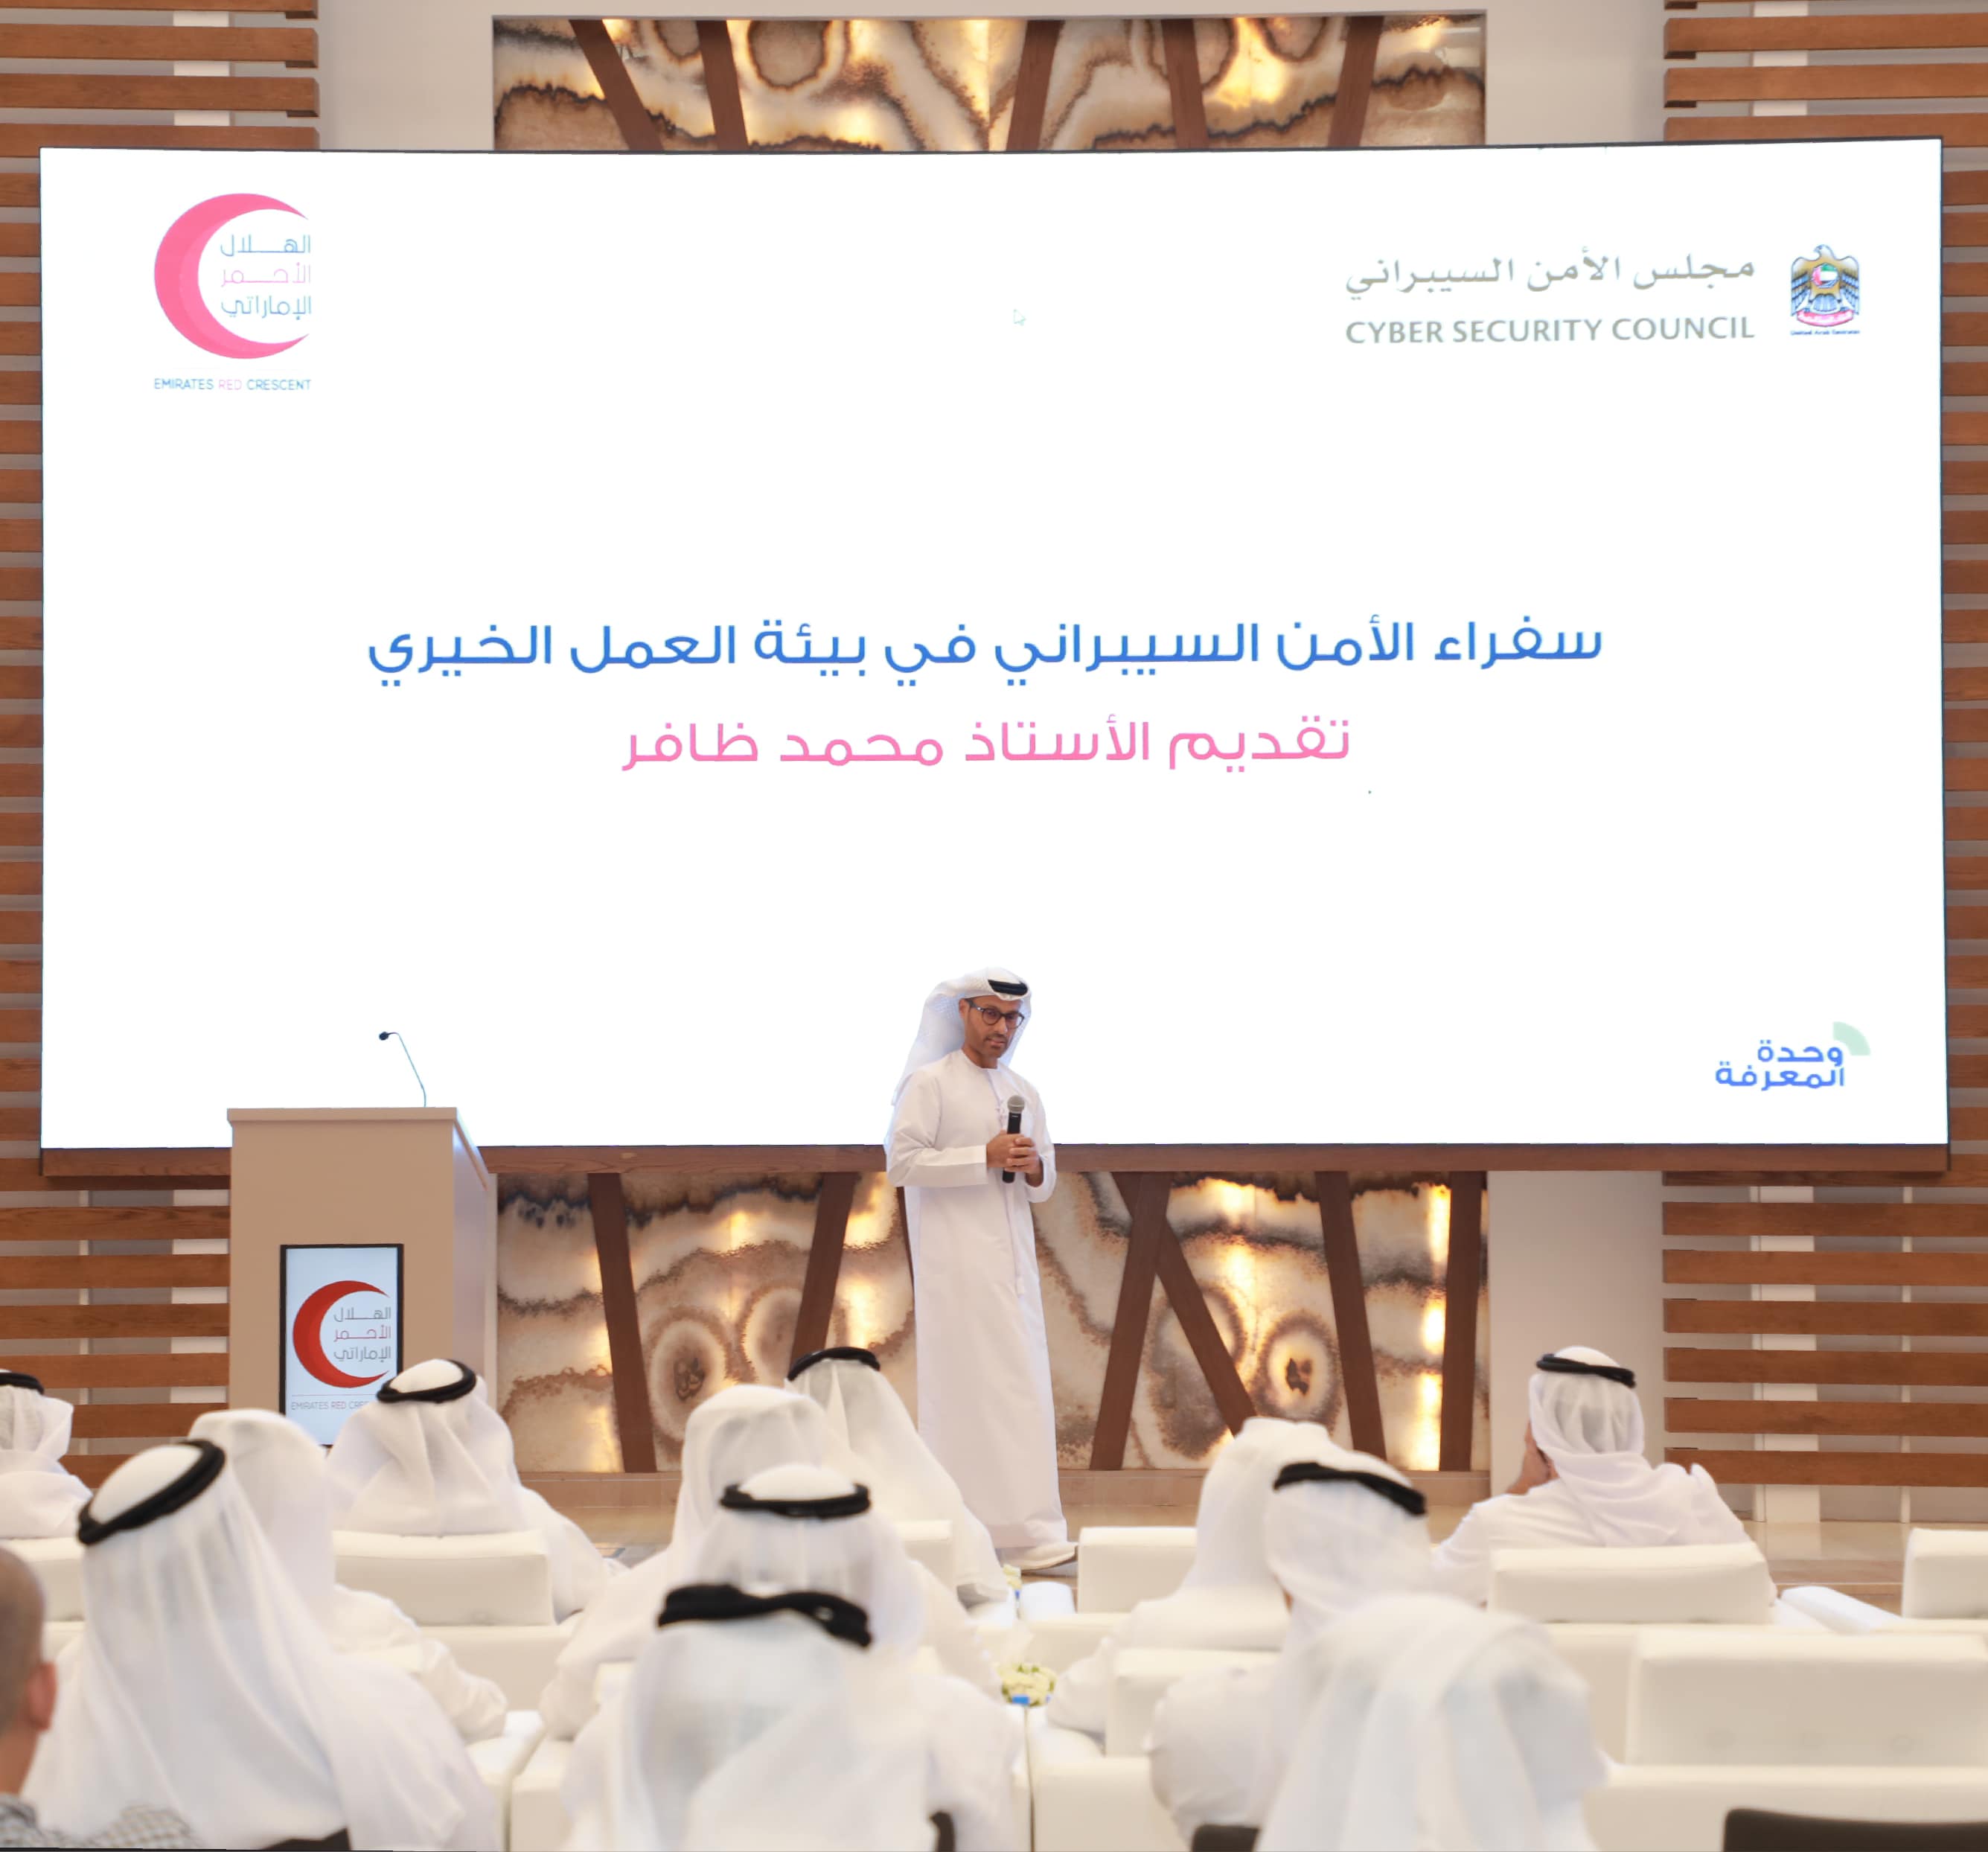 The Cyber Pulse Ambassadors program launches the start of the collaboration between the UAE Cyber Security Council and the Red Crescent Society of the United Arab Emirates